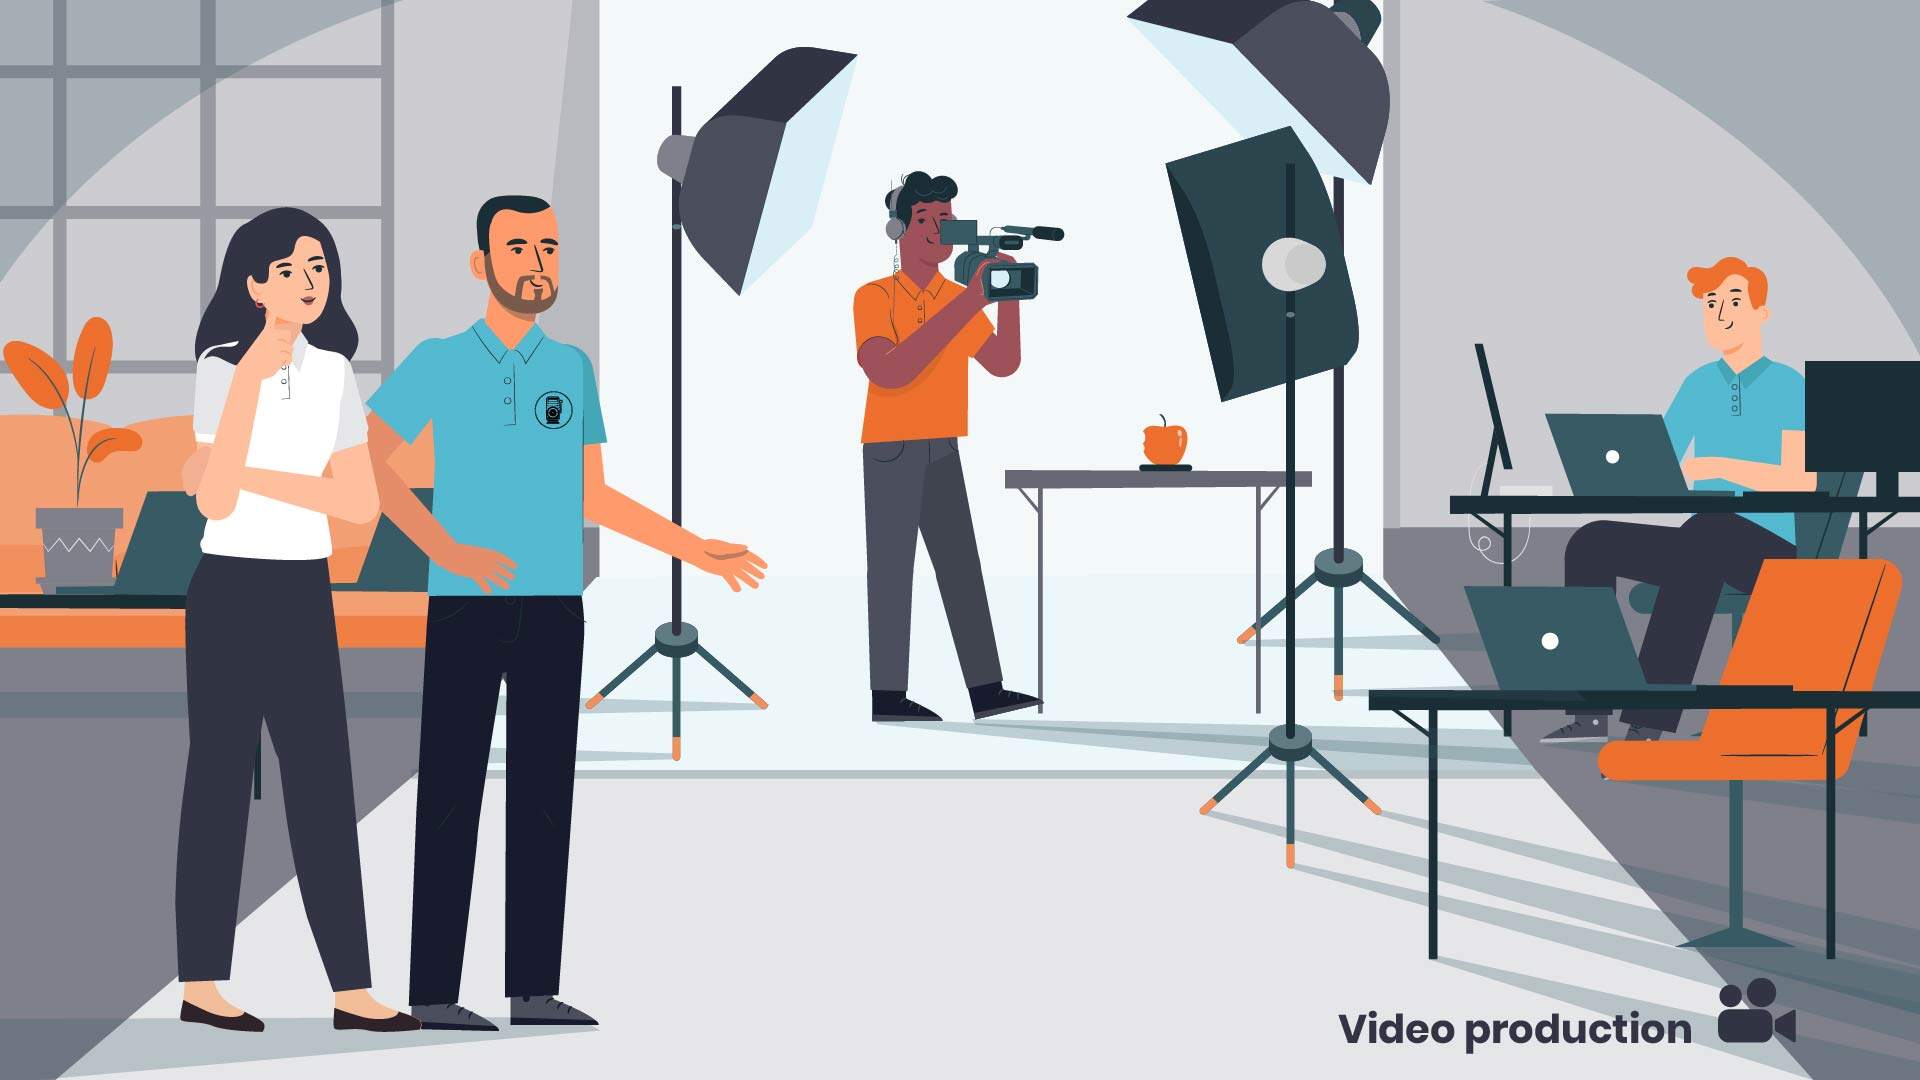 Animated video about creating professional photos and video content